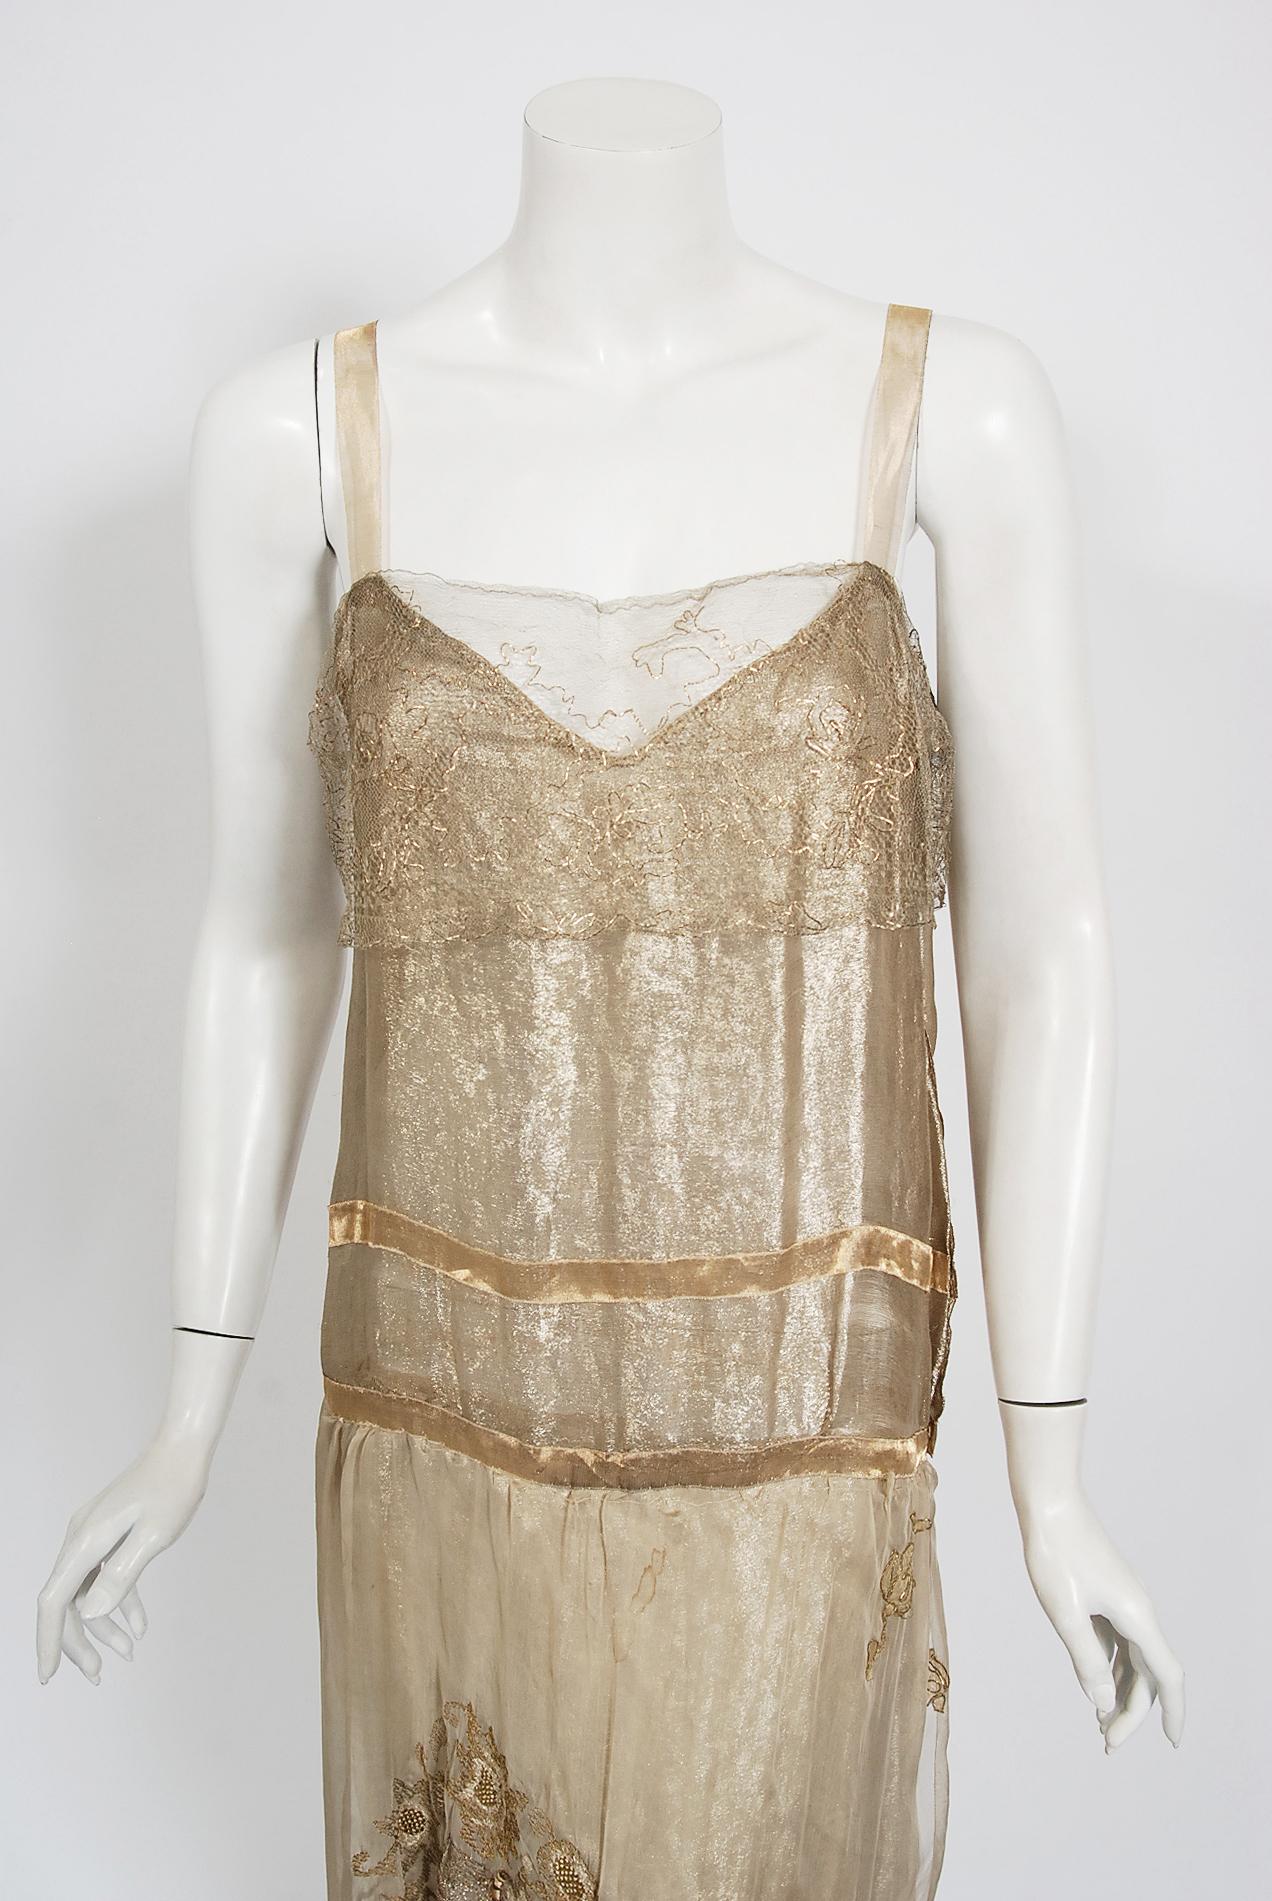 Undiminished by time, this 1920's French couture numbered 